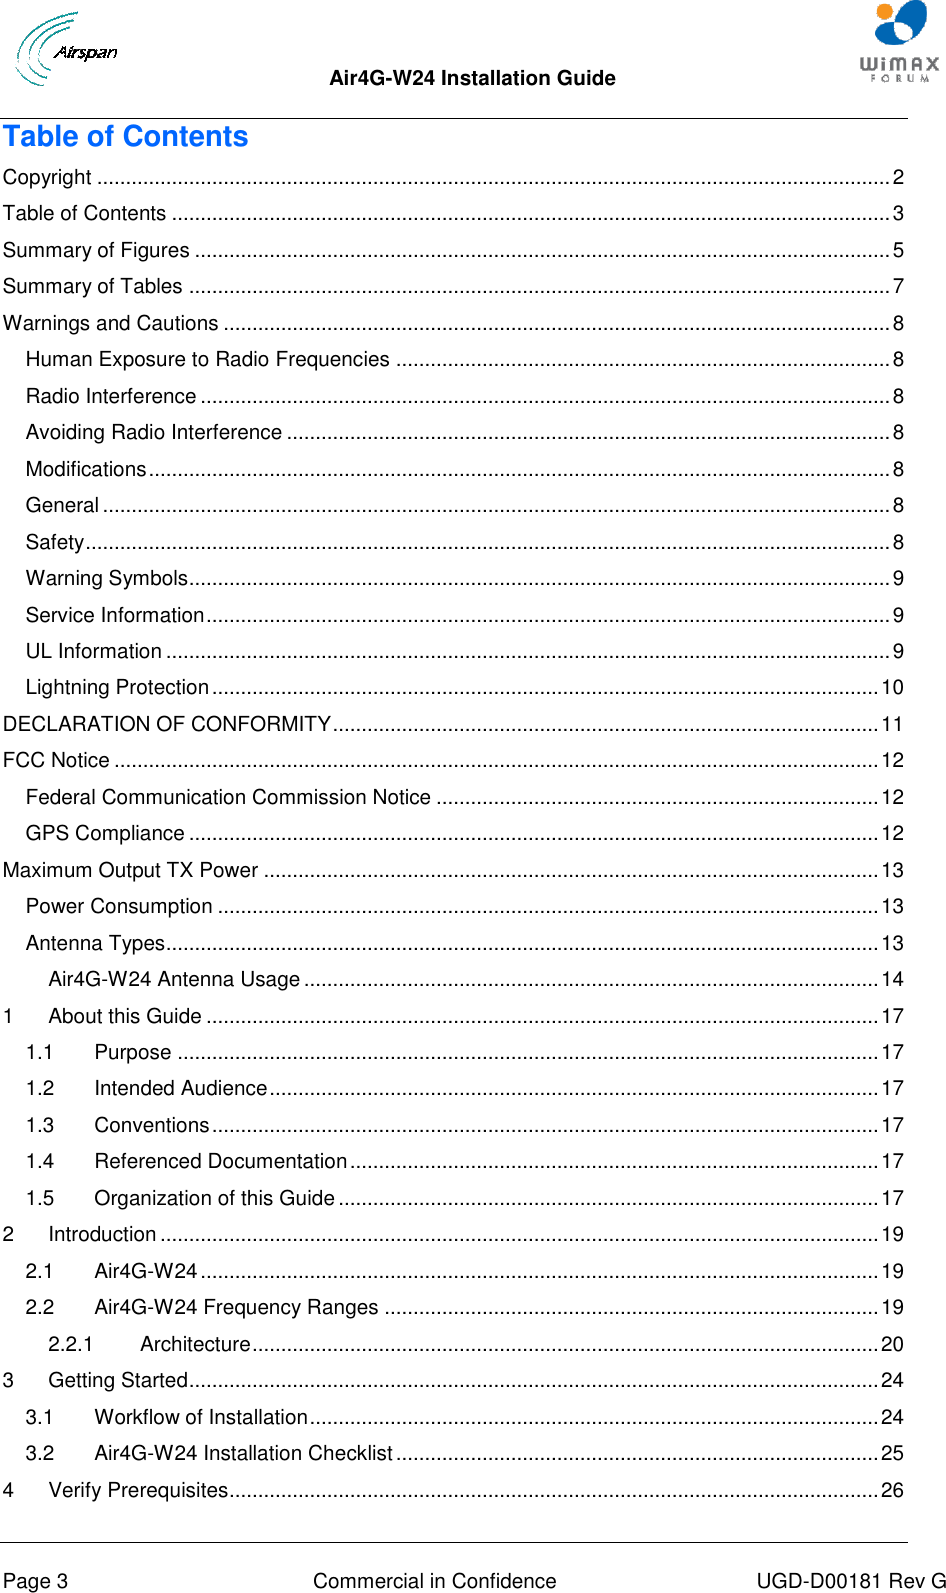  Air4G-W24 Installation Guide       Page 3  Commercial in Confidence  UGD-D00181 Rev G Table of Contents Copyright .......................................................................................................................................... 2 Table of Contents ............................................................................................................................. 3 Summary of Figures ......................................................................................................................... 5 Summary of Tables .......................................................................................................................... 7 Warnings and Cautions .................................................................................................................... 8 Human Exposure to Radio Frequencies ...................................................................................... 8 Radio Interference ........................................................................................................................ 8 Avoiding Radio Interference ......................................................................................................... 8 Modifications ................................................................................................................................. 8 General ......................................................................................................................................... 8 Safety ............................................................................................................................................ 8 Warning Symbols.......................................................................................................................... 9 Service Information ....................................................................................................................... 9 UL Information .............................................................................................................................. 9 Lightning Protection .................................................................................................................... 10 DECLARATION OF CONFORMITY ............................................................................................... 11 FCC Notice ..................................................................................................................................... 12 Federal Communication Commission Notice ............................................................................. 12 GPS Compliance ........................................................................................................................ 12 Maximum Output TX Power ........................................................................................................... 13 Power Consumption ................................................................................................................... 13 Antenna Types............................................................................................................................ 13 Air4G-W24 Antenna Usage .................................................................................................... 14 1 About this Guide ..................................................................................................................... 17 1.1 Purpose .......................................................................................................................... 17 1.2 Intended Audience .......................................................................................................... 17 1.3 Conventions .................................................................................................................... 17 1.4 Referenced Documentation ............................................................................................ 17 1.5 Organization of this Guide .............................................................................................. 17 2 Introduction ............................................................................................................................. 19 2.1 Air4G-W24 ...................................................................................................................... 19 2.2 Air4G-W24 Frequency Ranges ...................................................................................... 19 2.2.1 Architecture ............................................................................................................. 20 3 Getting Started ........................................................................................................................ 24 3.1 Workflow of Installation ................................................................................................... 24 3.2 Air4G-W24 Installation Checklist .................................................................................... 25 4 Verify Prerequisites................................................................................................................. 26 